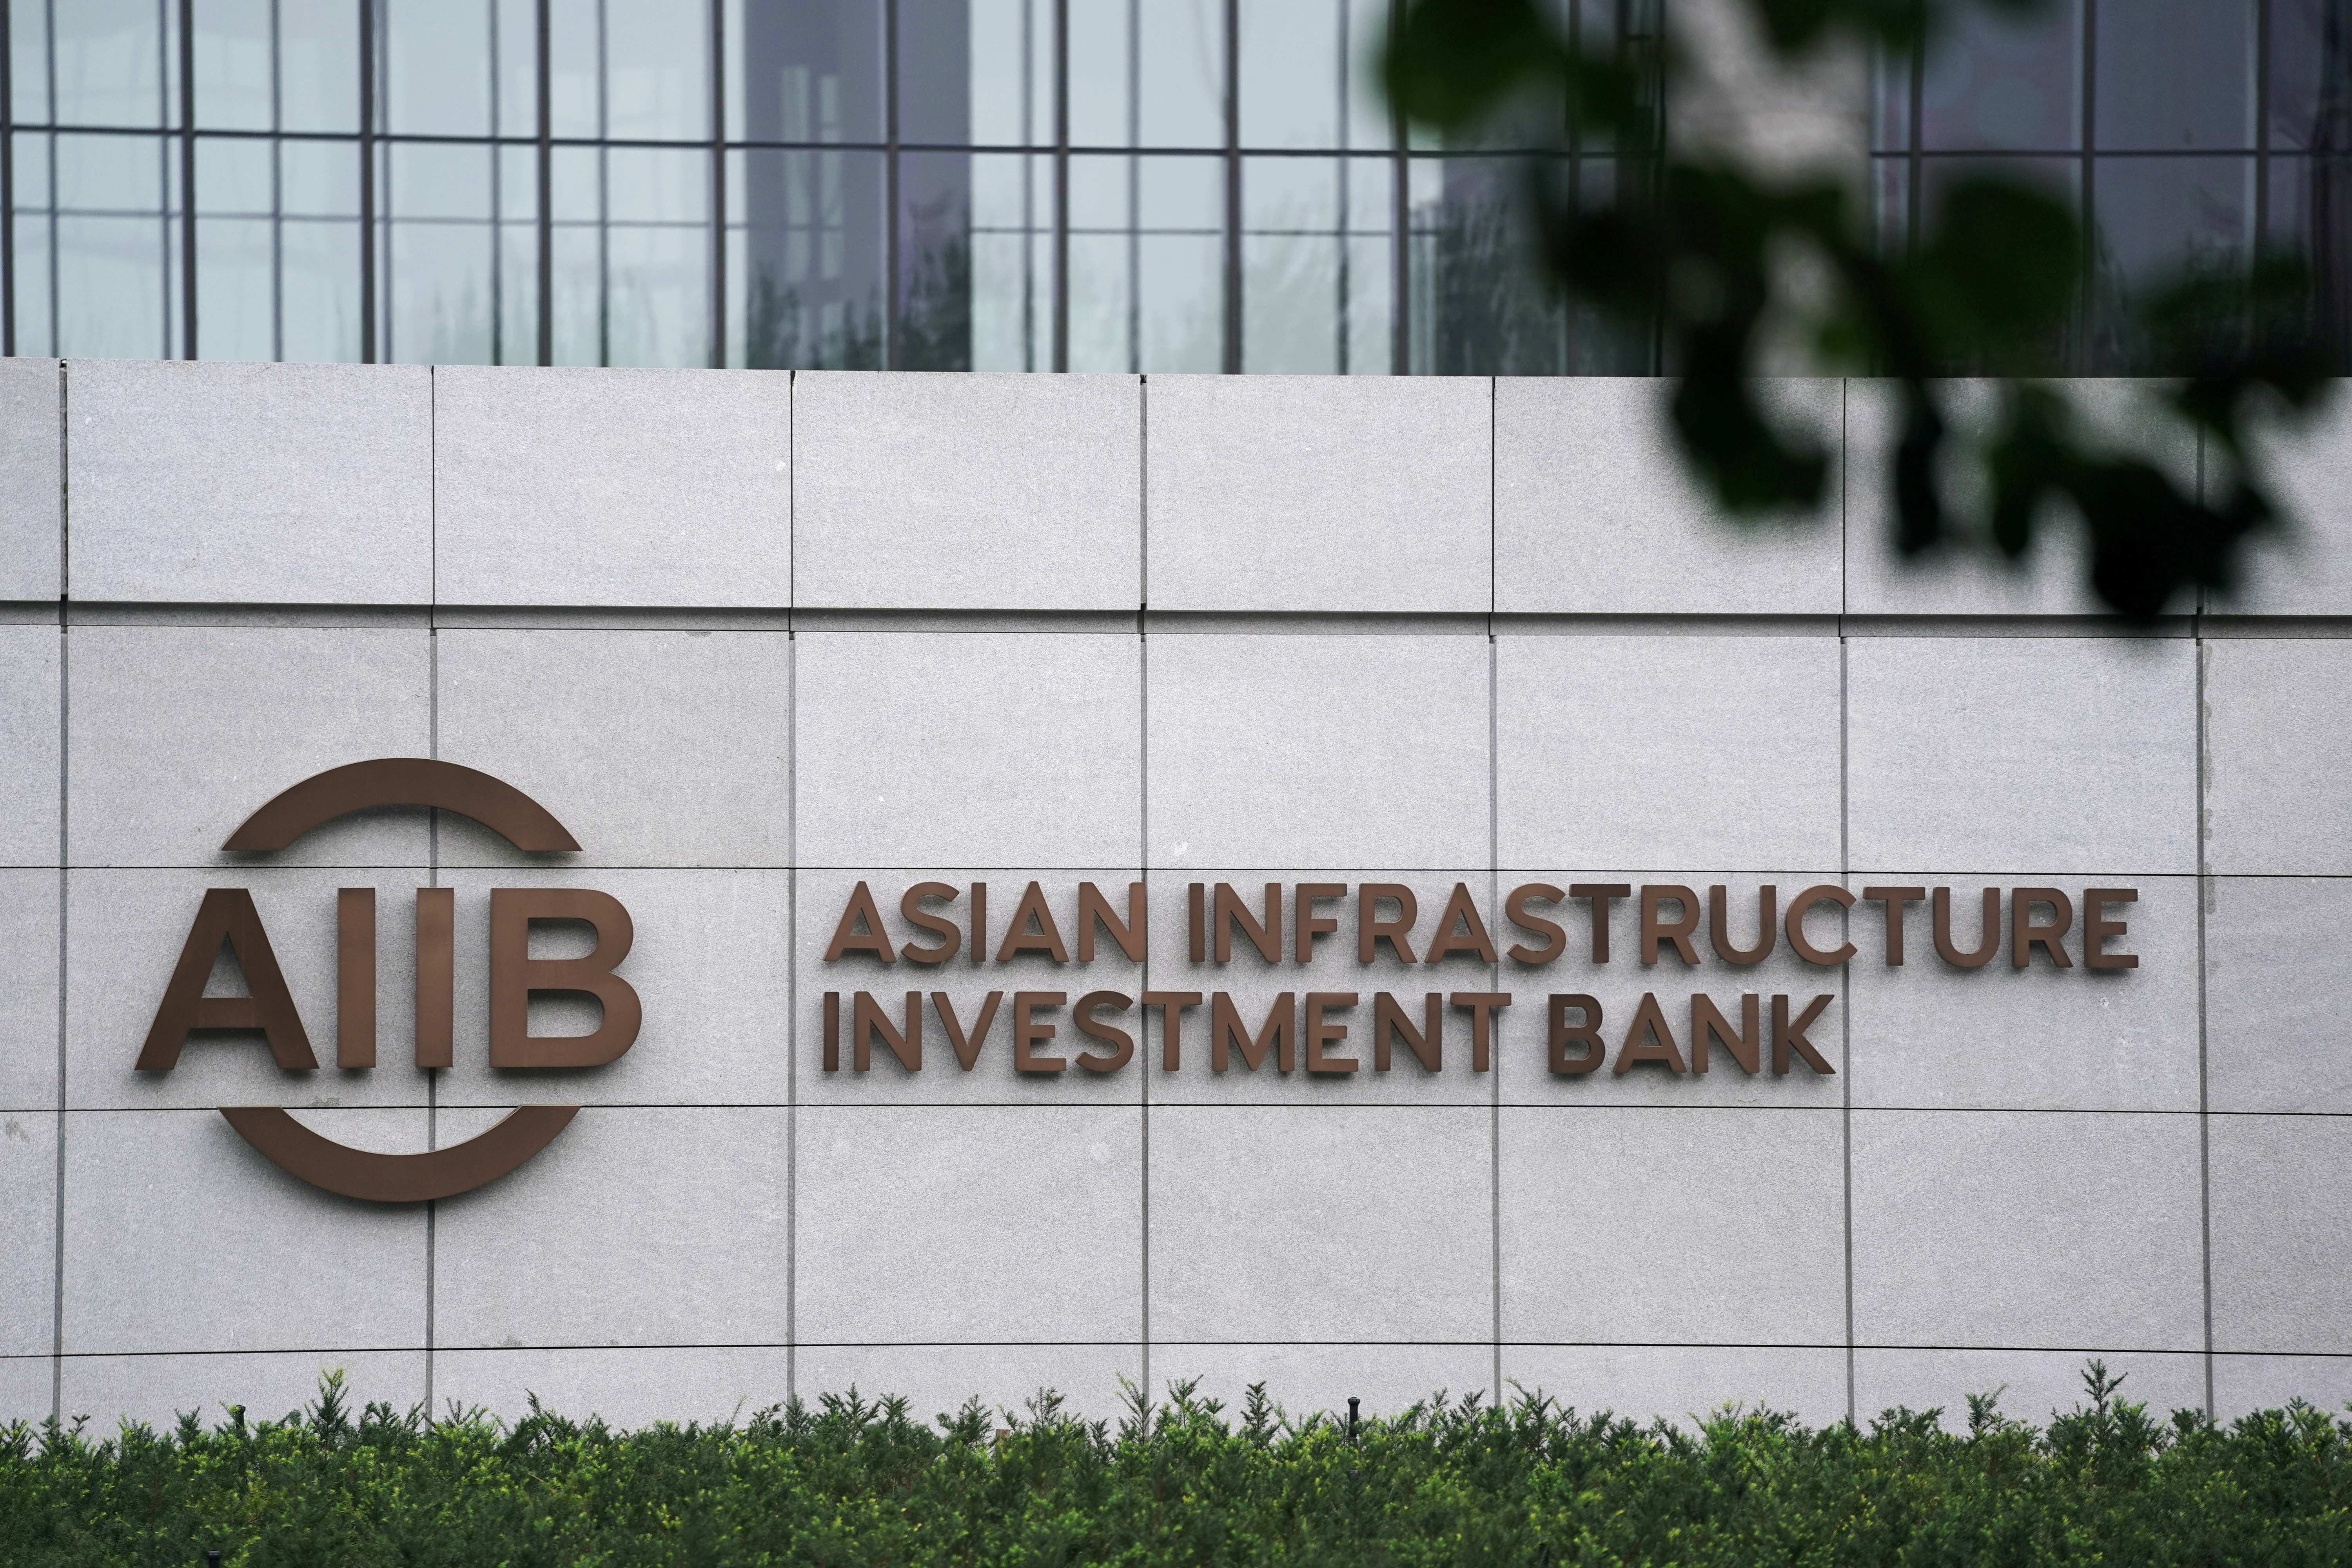 Headquarters of Asian Infrastructure Investment Bank (AIIB) in Beijing